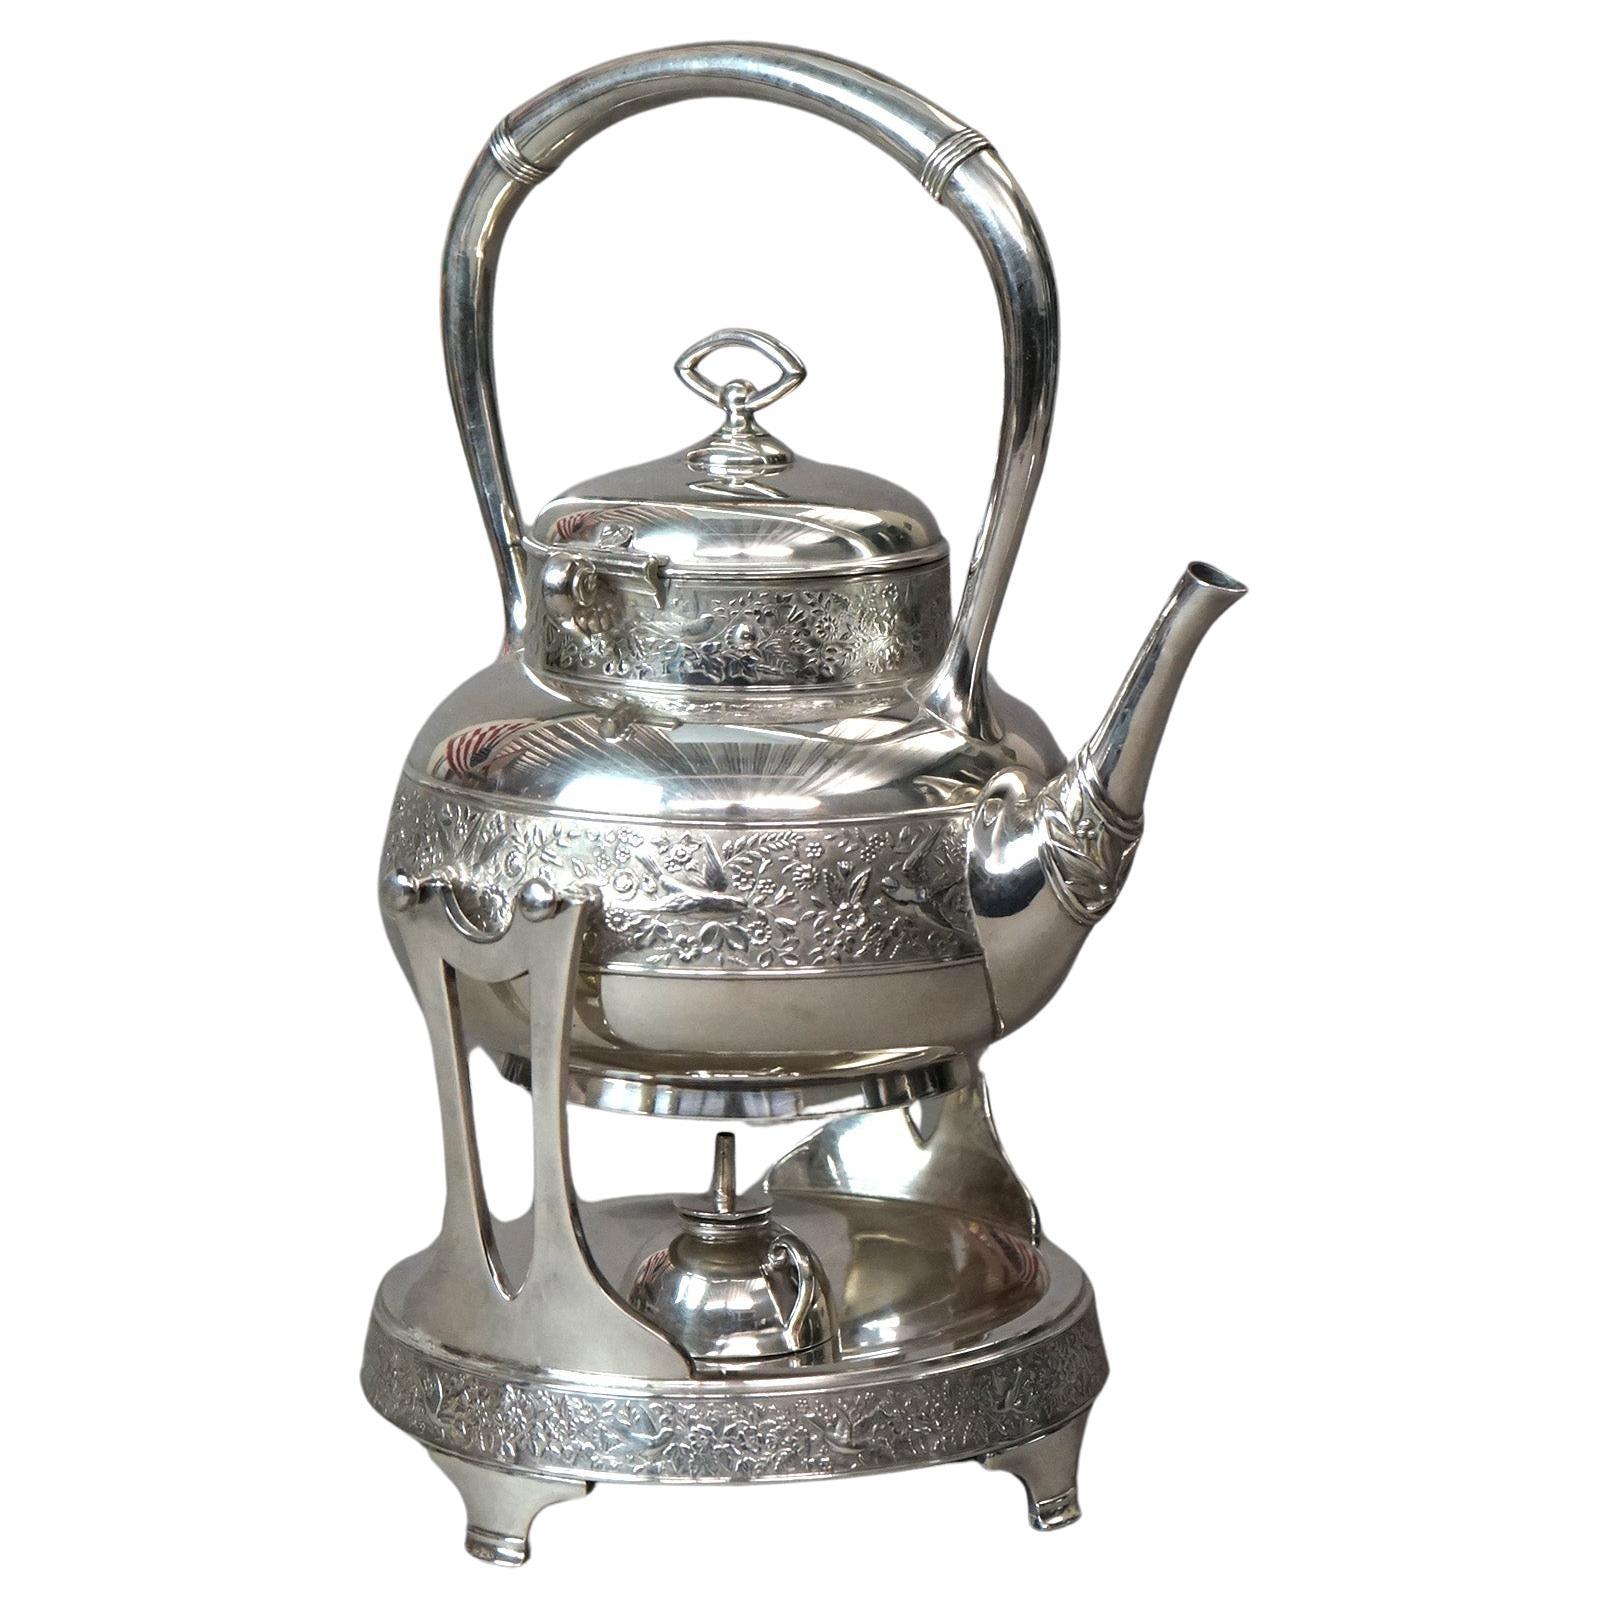 Antique Rogers Aesthetic Silver Plated Tilting Teapot & Stand with Birds C1870 For Sale